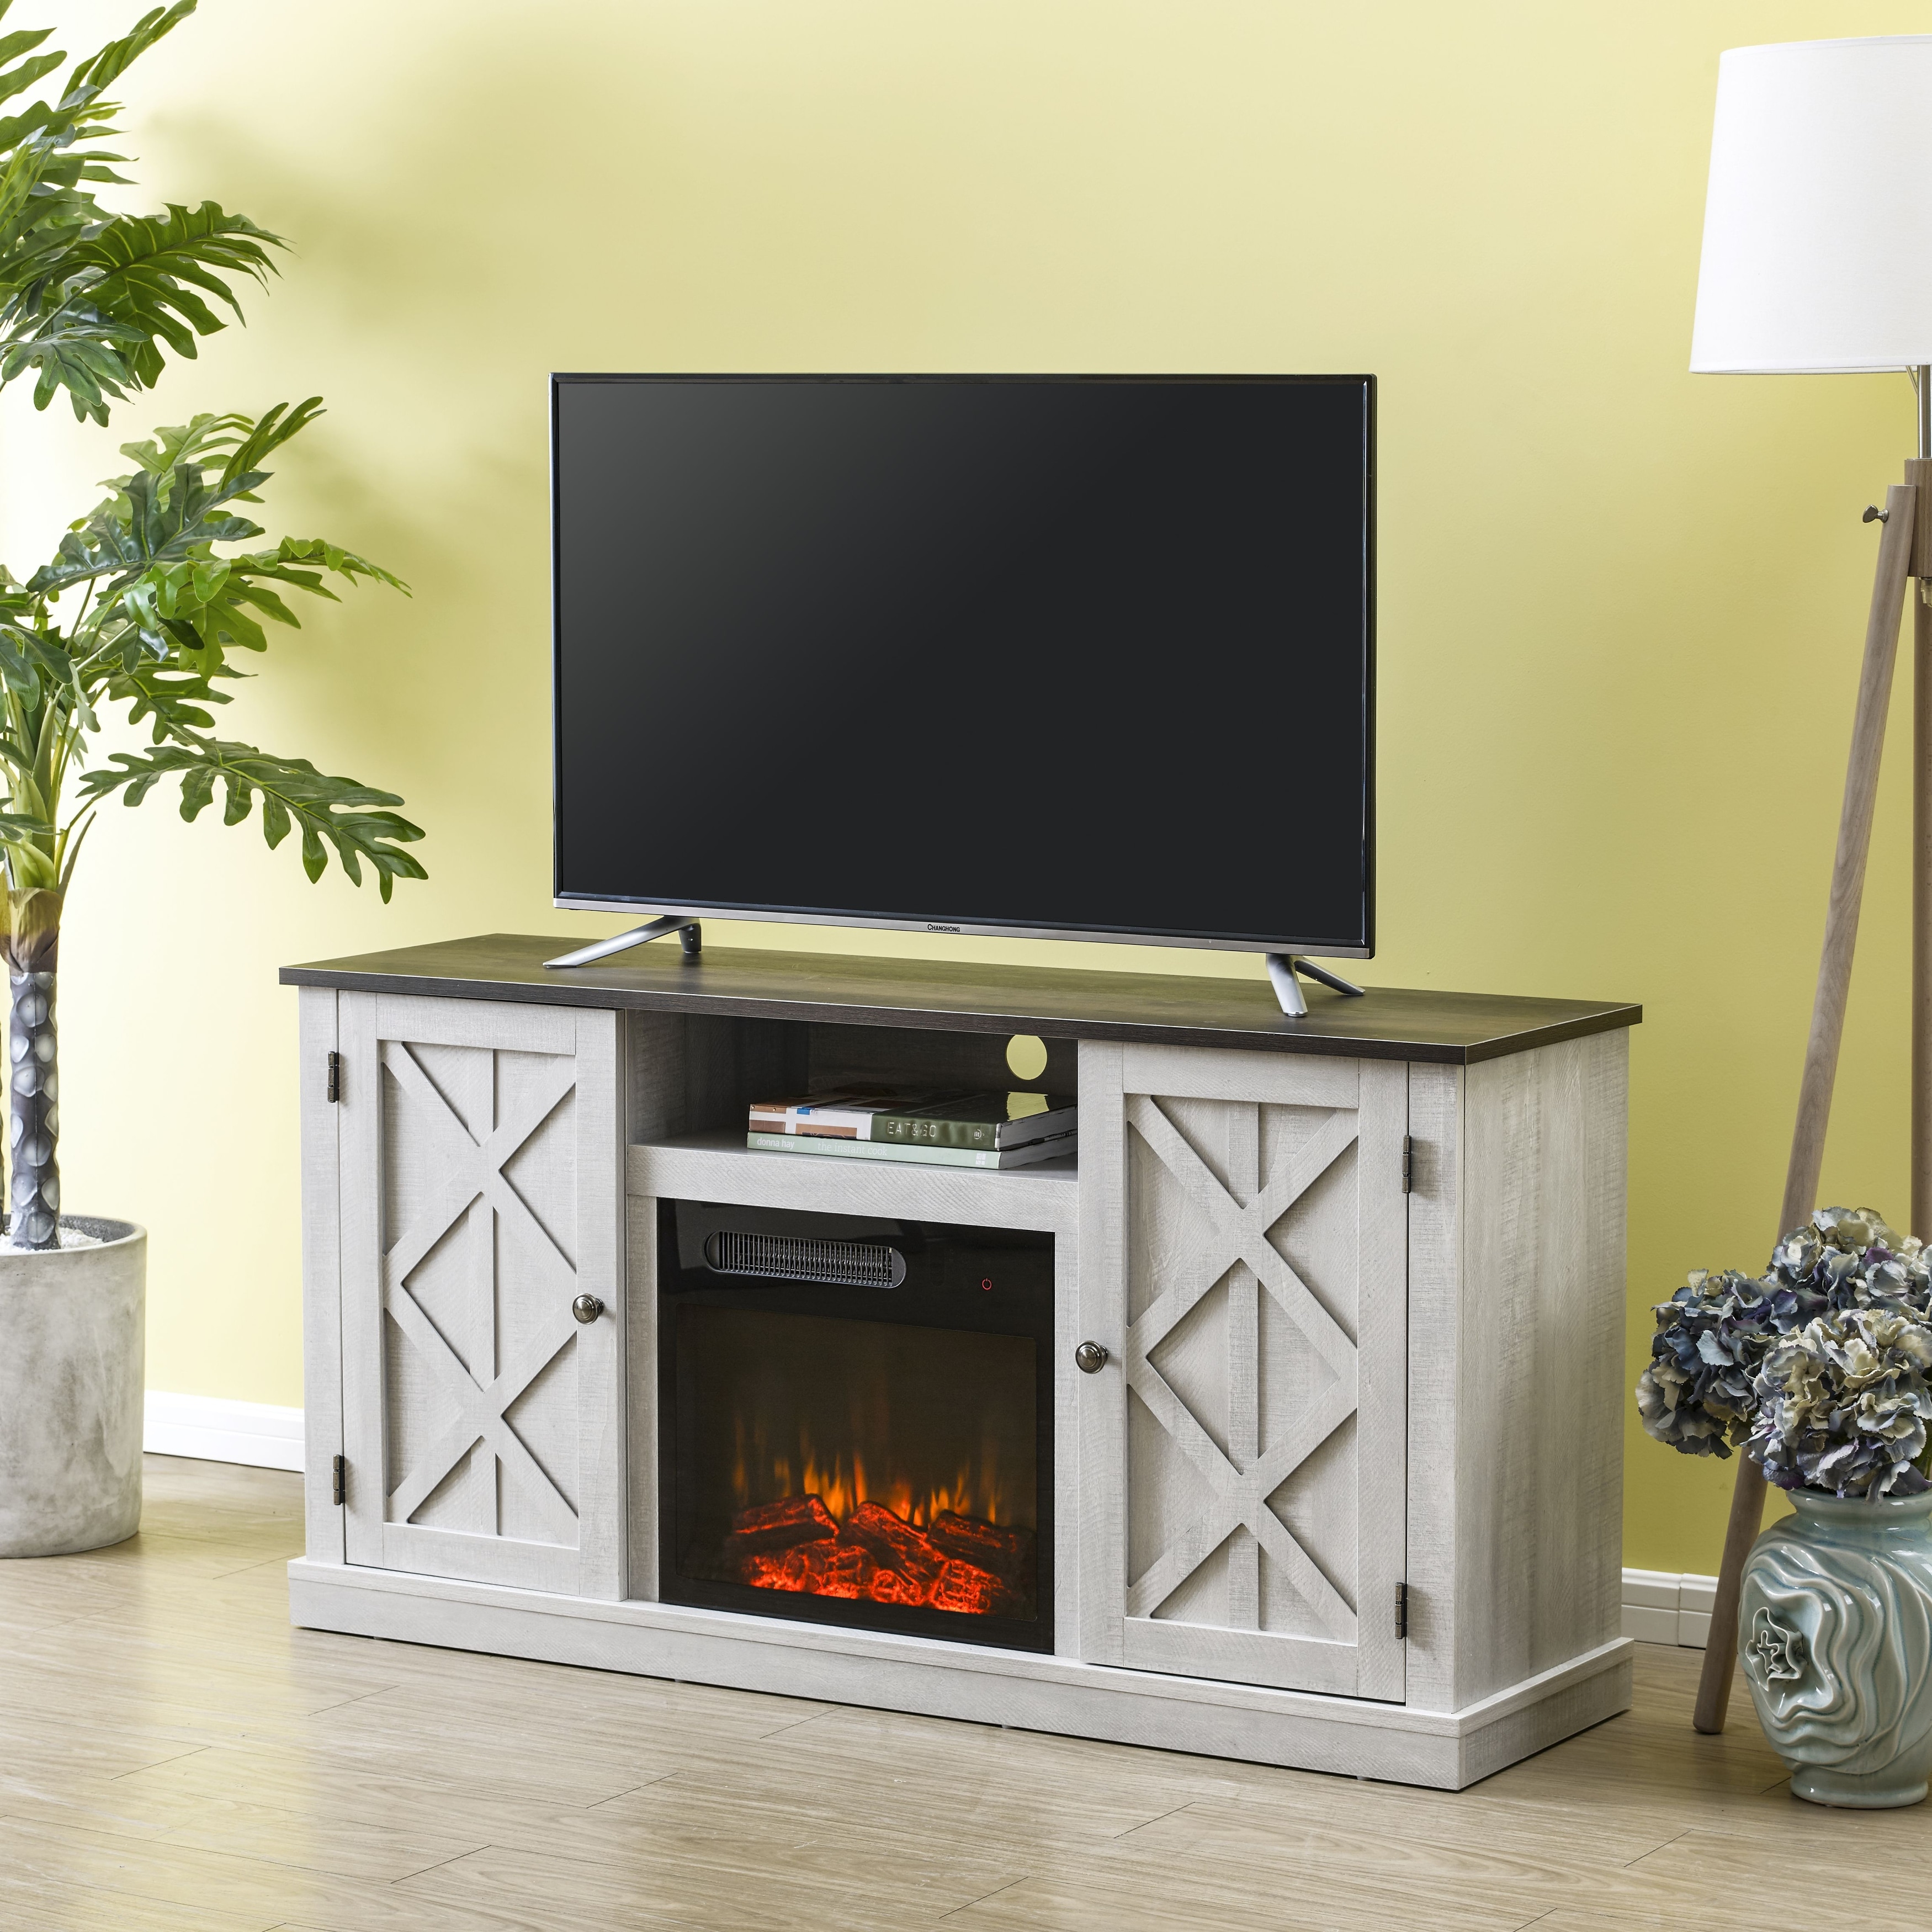 FESTIVO 54 in. TV Stand Console for TVs up to 60 in. with Electric Fireplace - 54 inch in Width